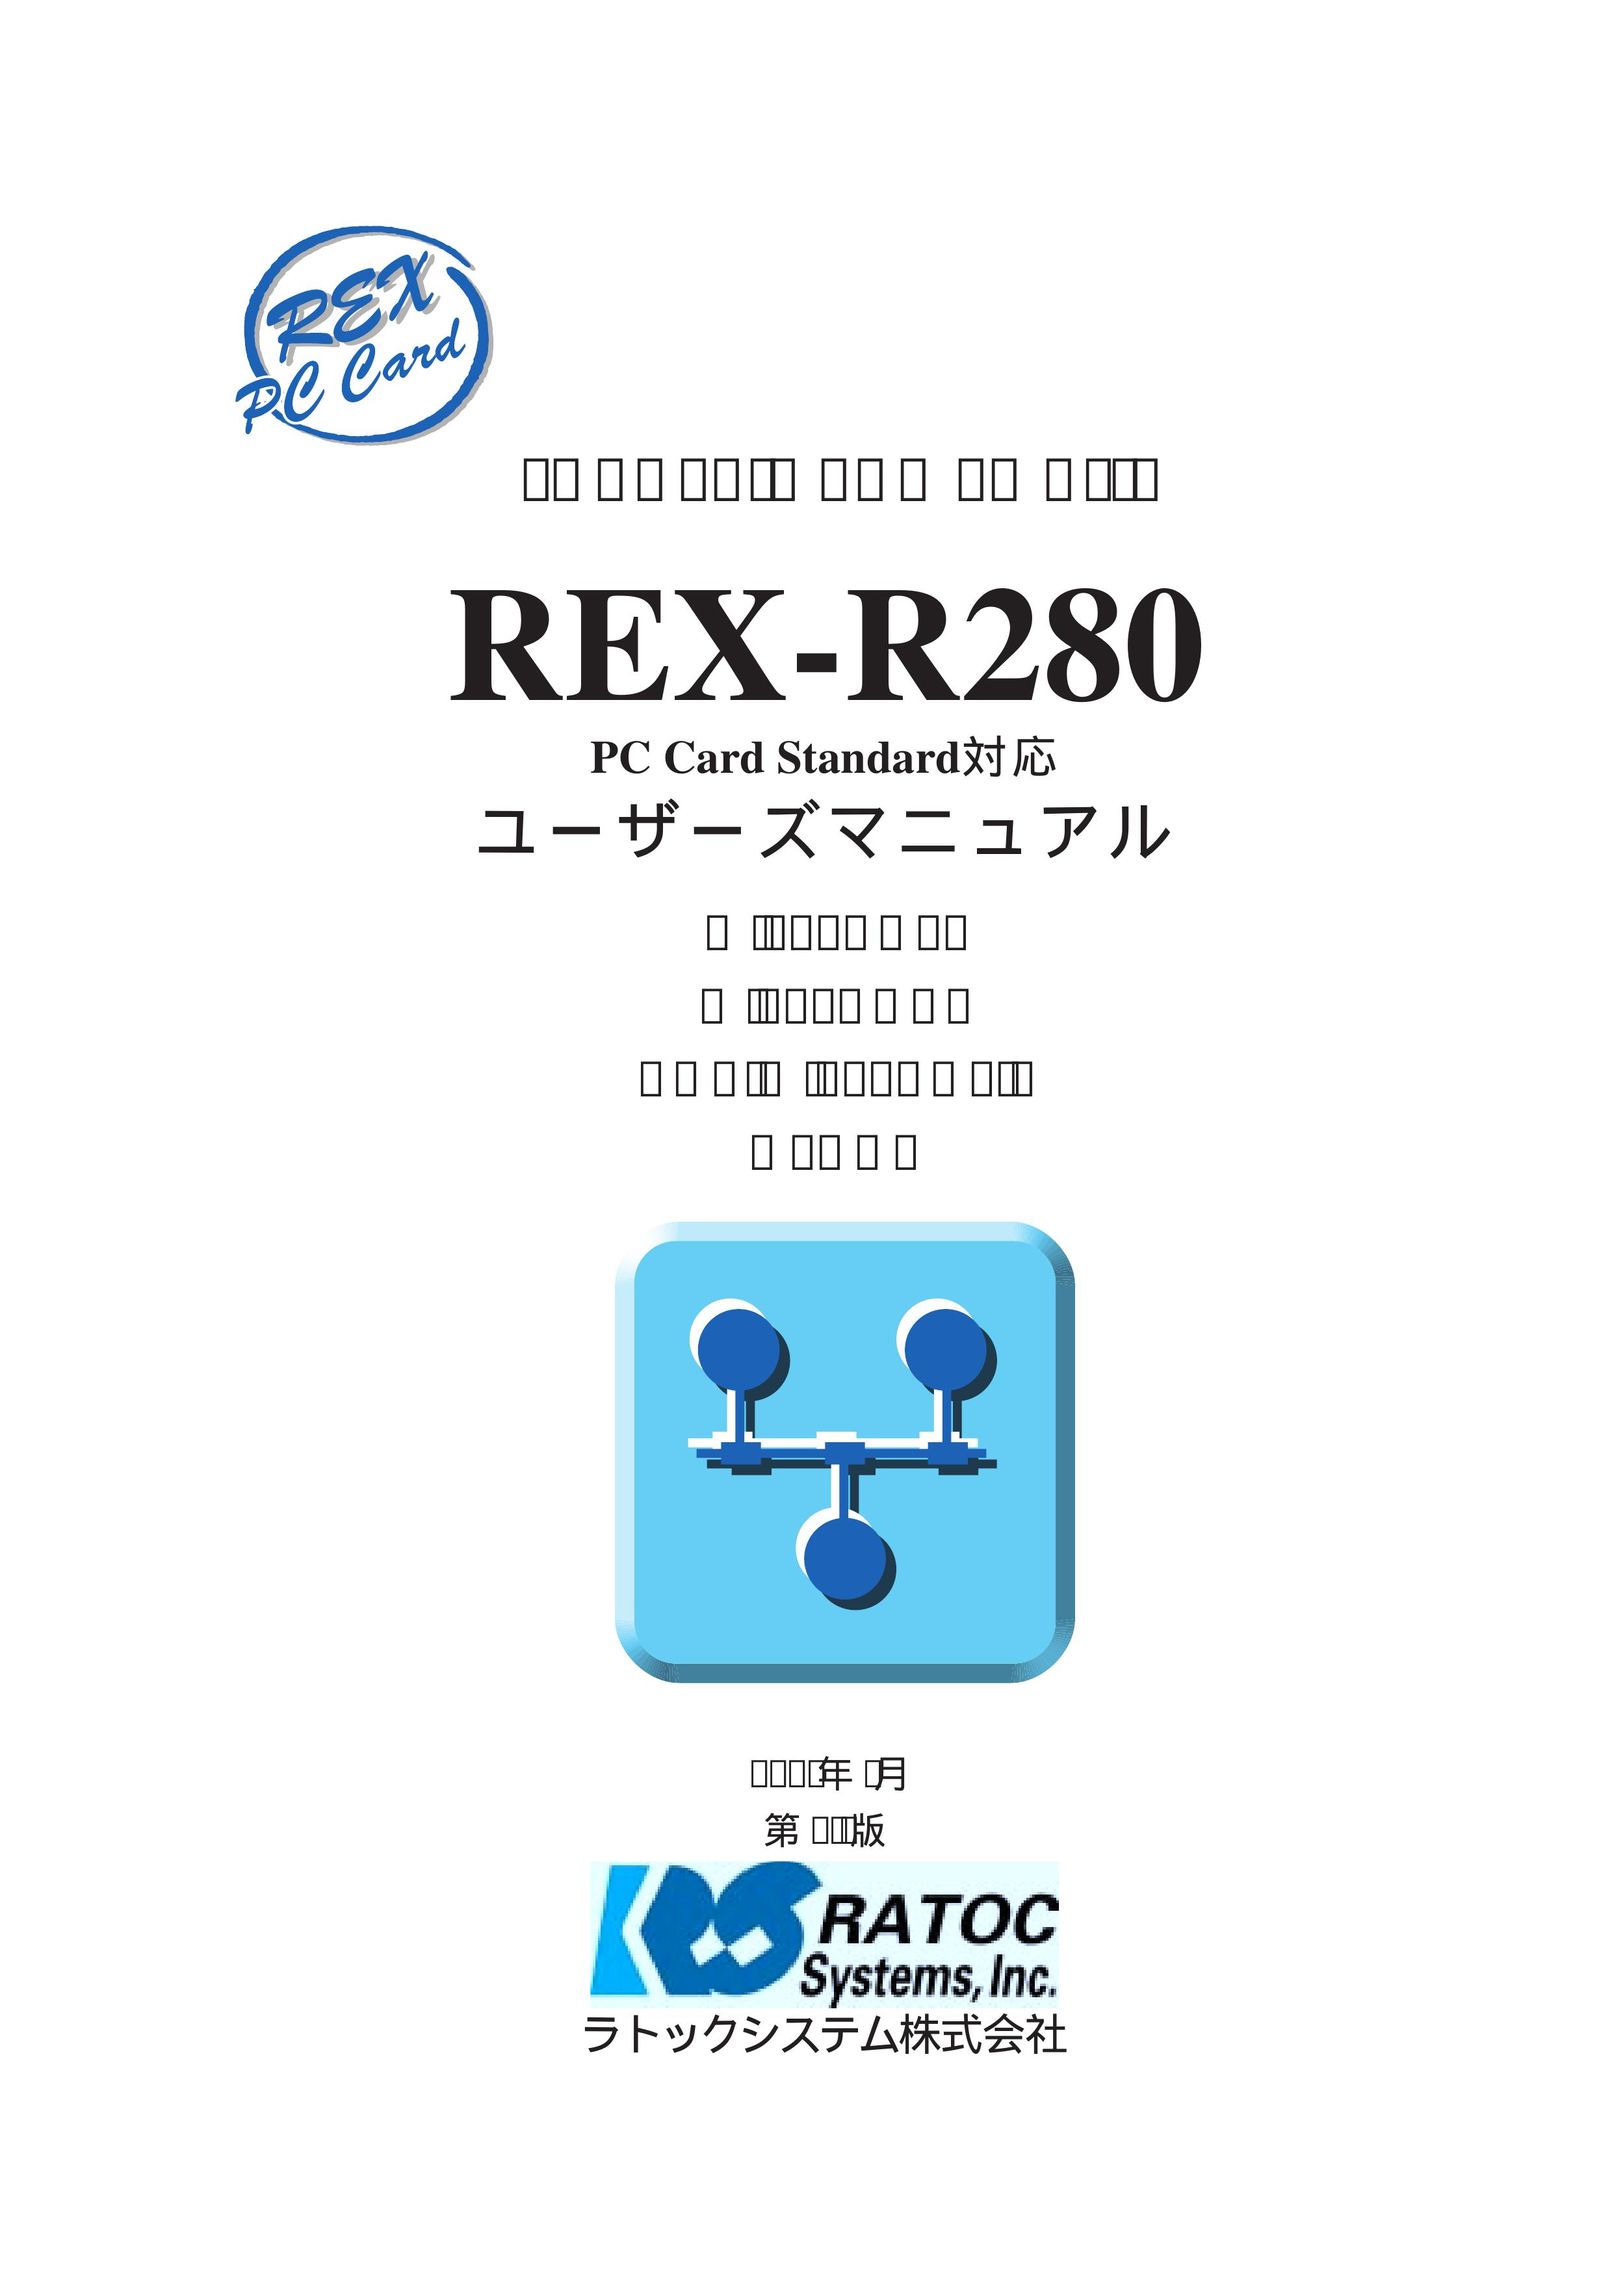 Ratoc Systems REX-R280 Network Card User Manual